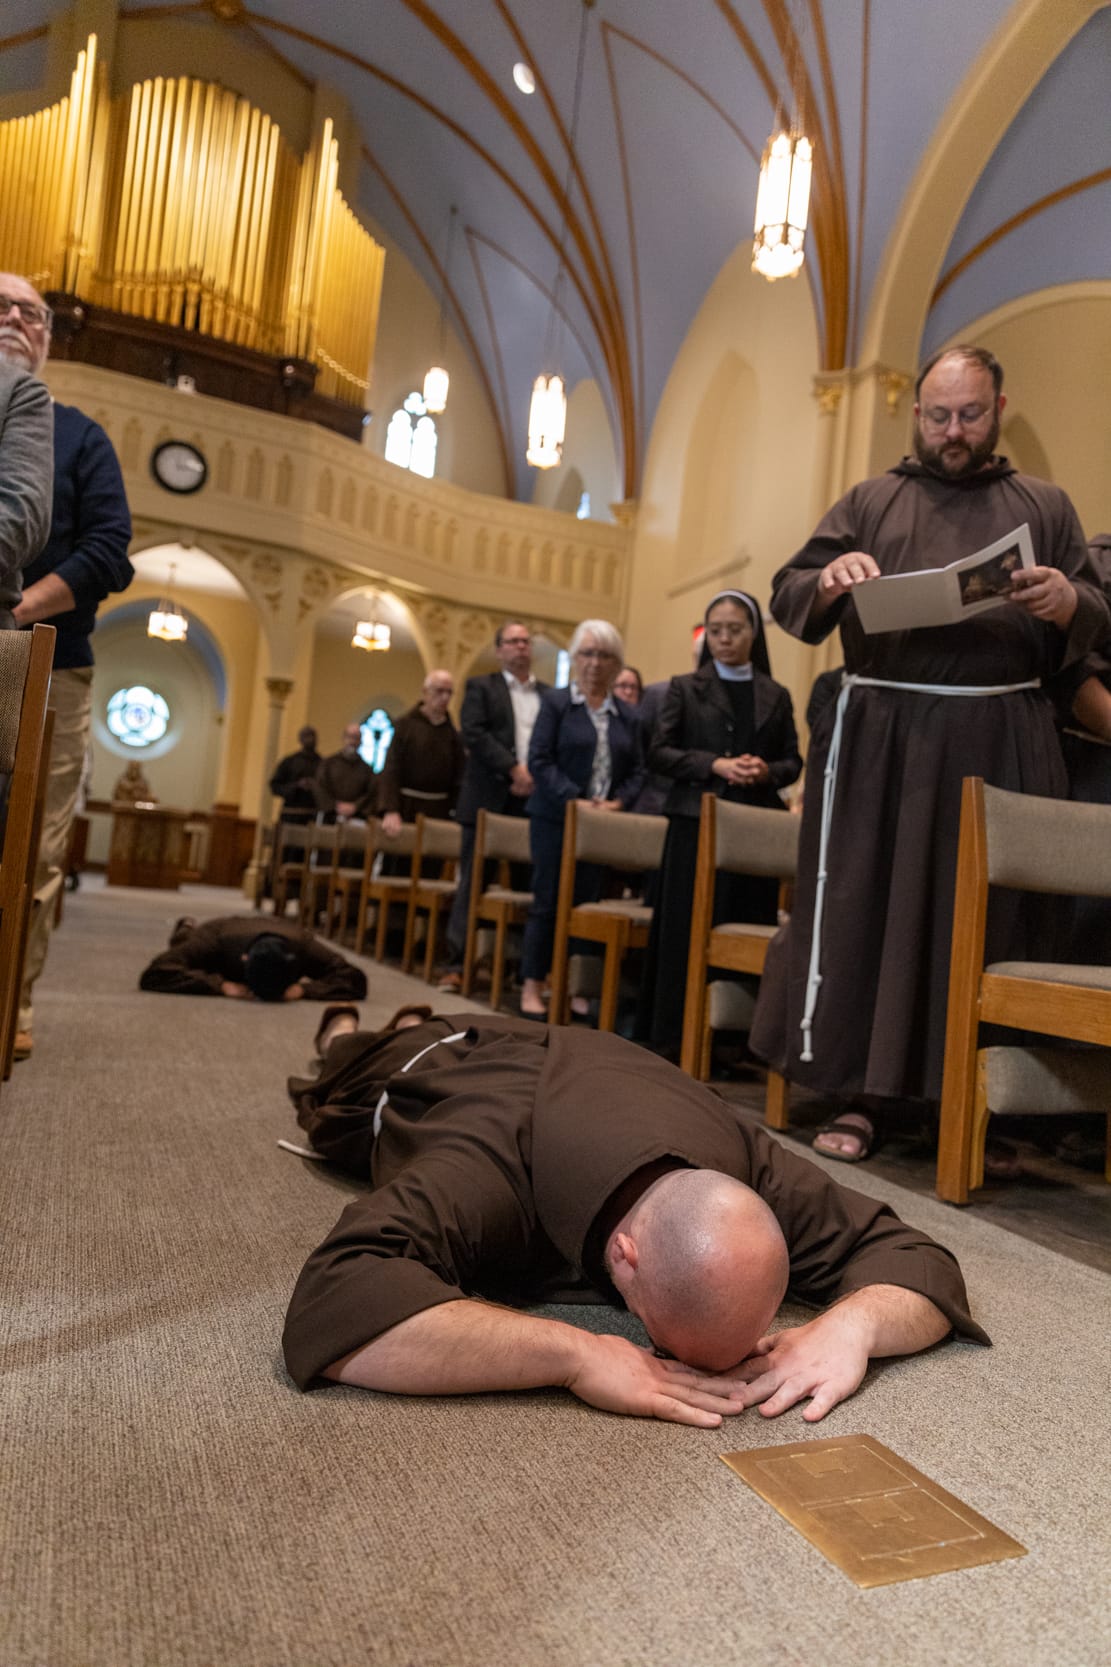 The newly-professed lie prostrate before the altar at St. Bonaventure.